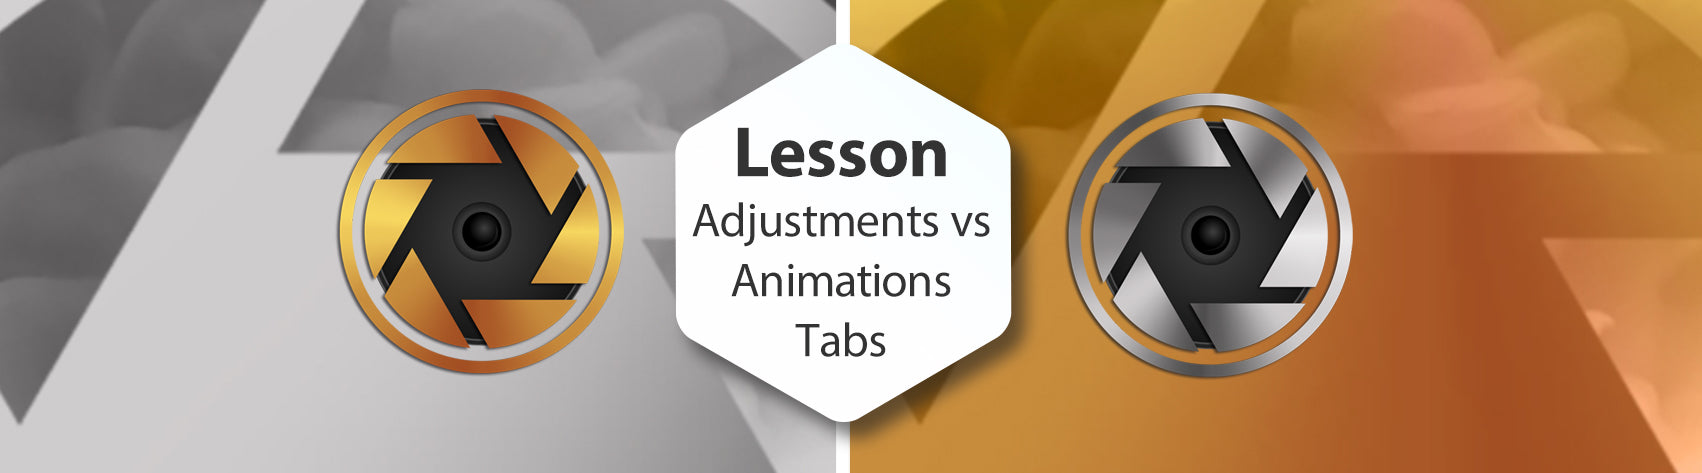 Lesson - Adjustments vs Animations Tabs in Photopia